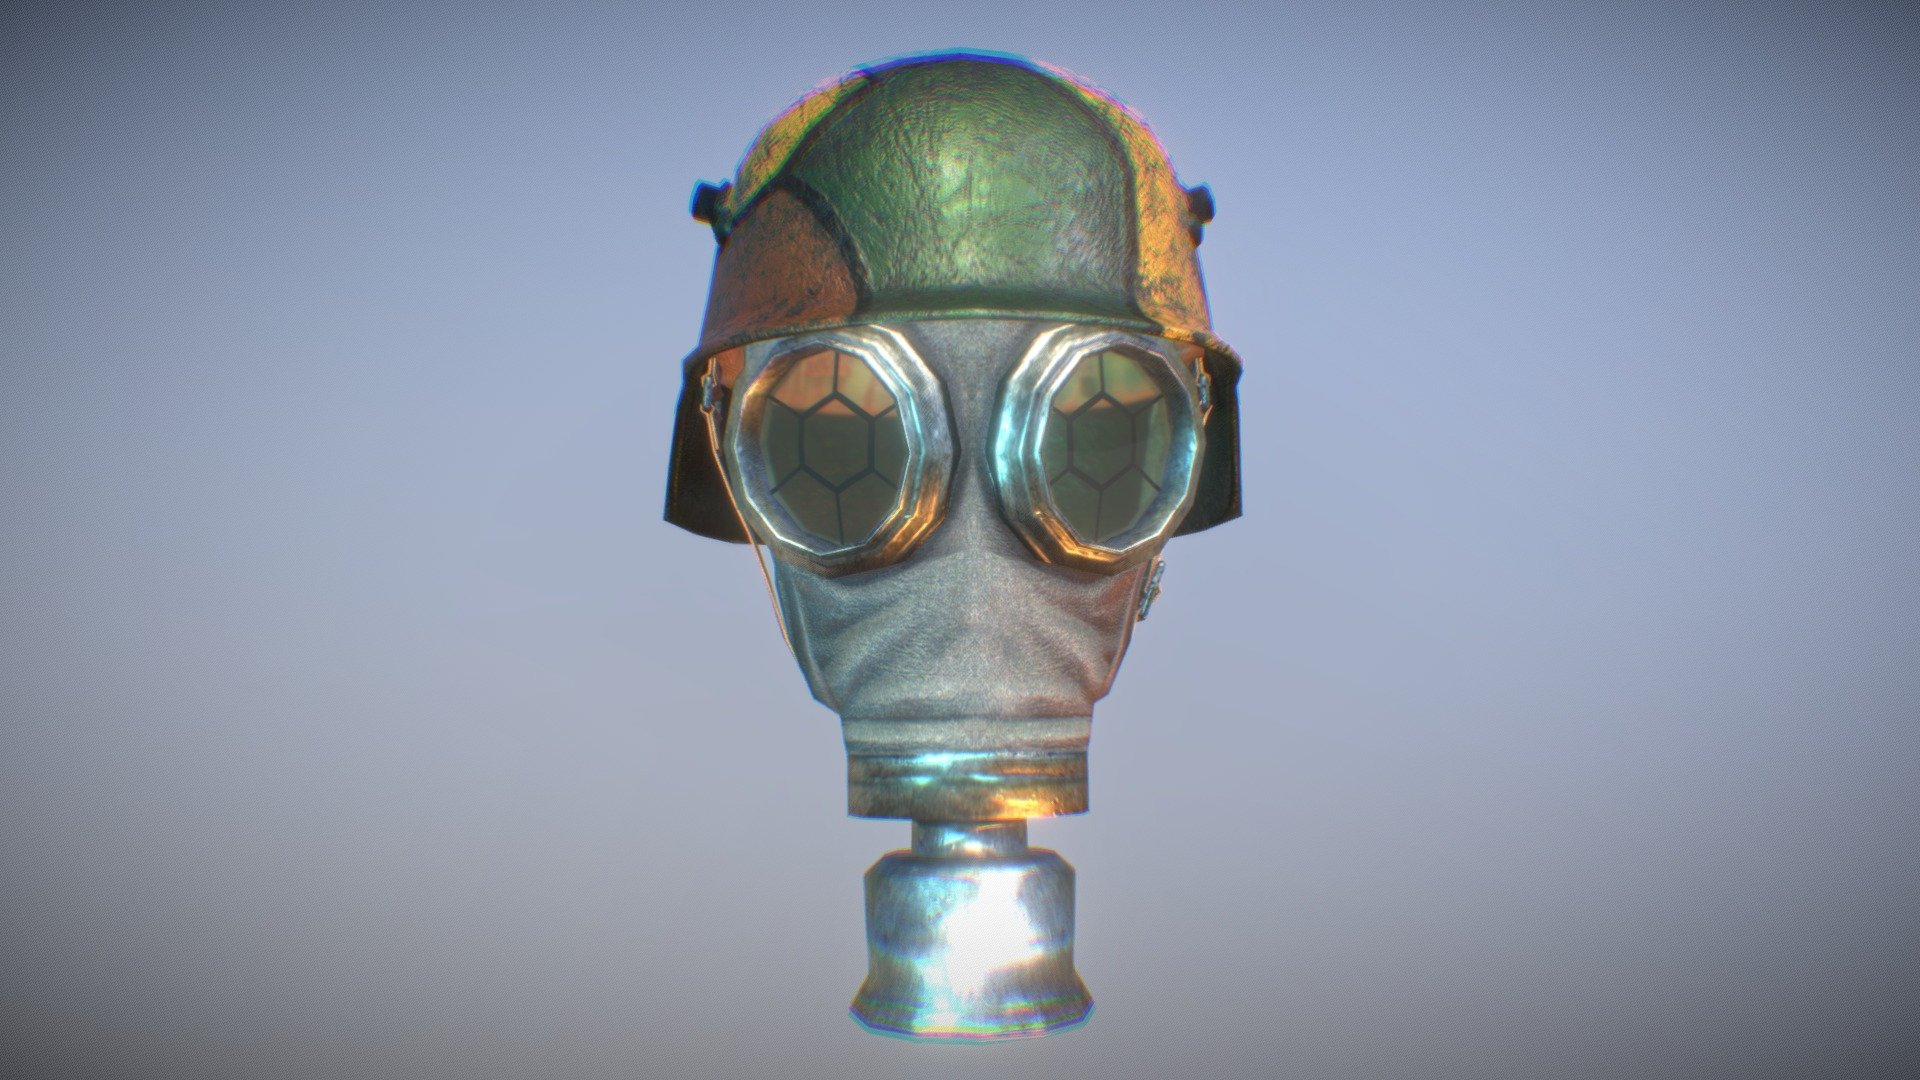 German Helmet with a Gas Mask